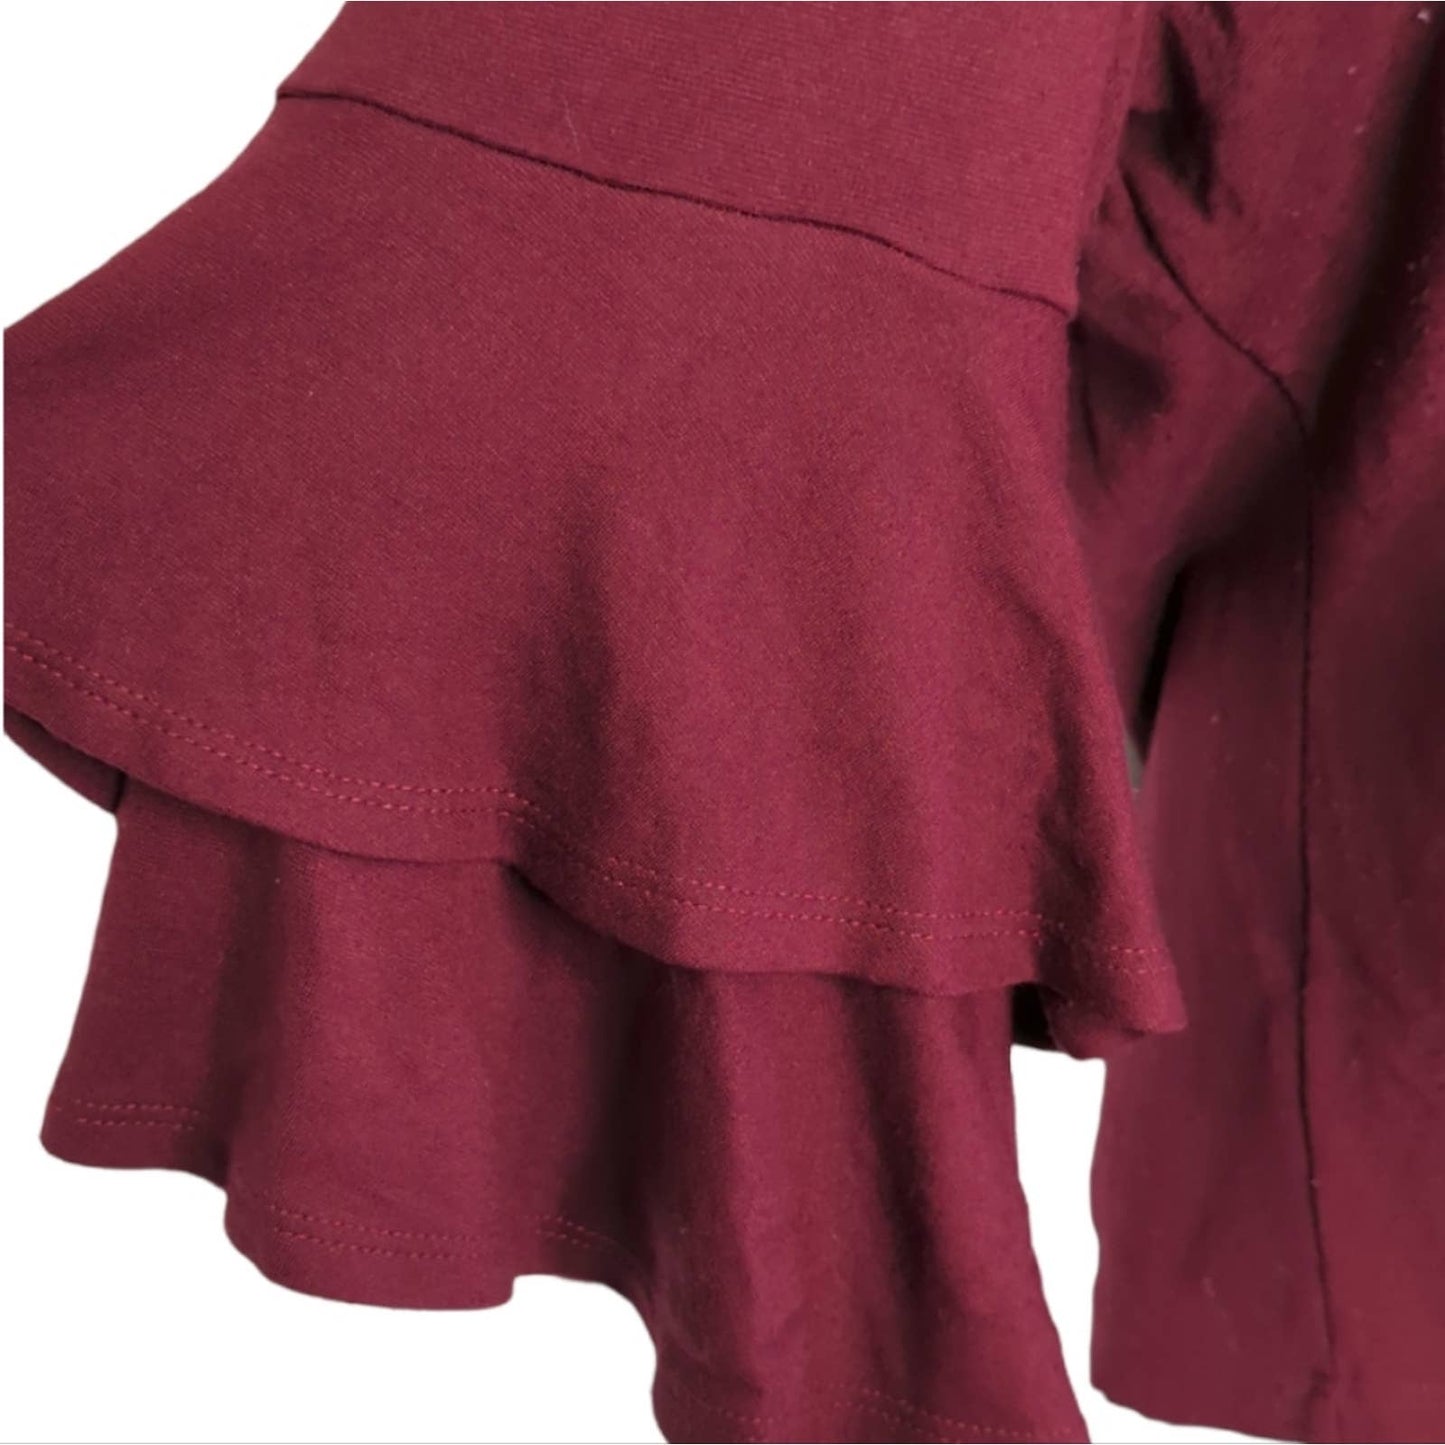 ANTHROPOLOGIE W5 Burgundy Heavy Knit Career Top with 3/4 Ruffle Sleeves XL